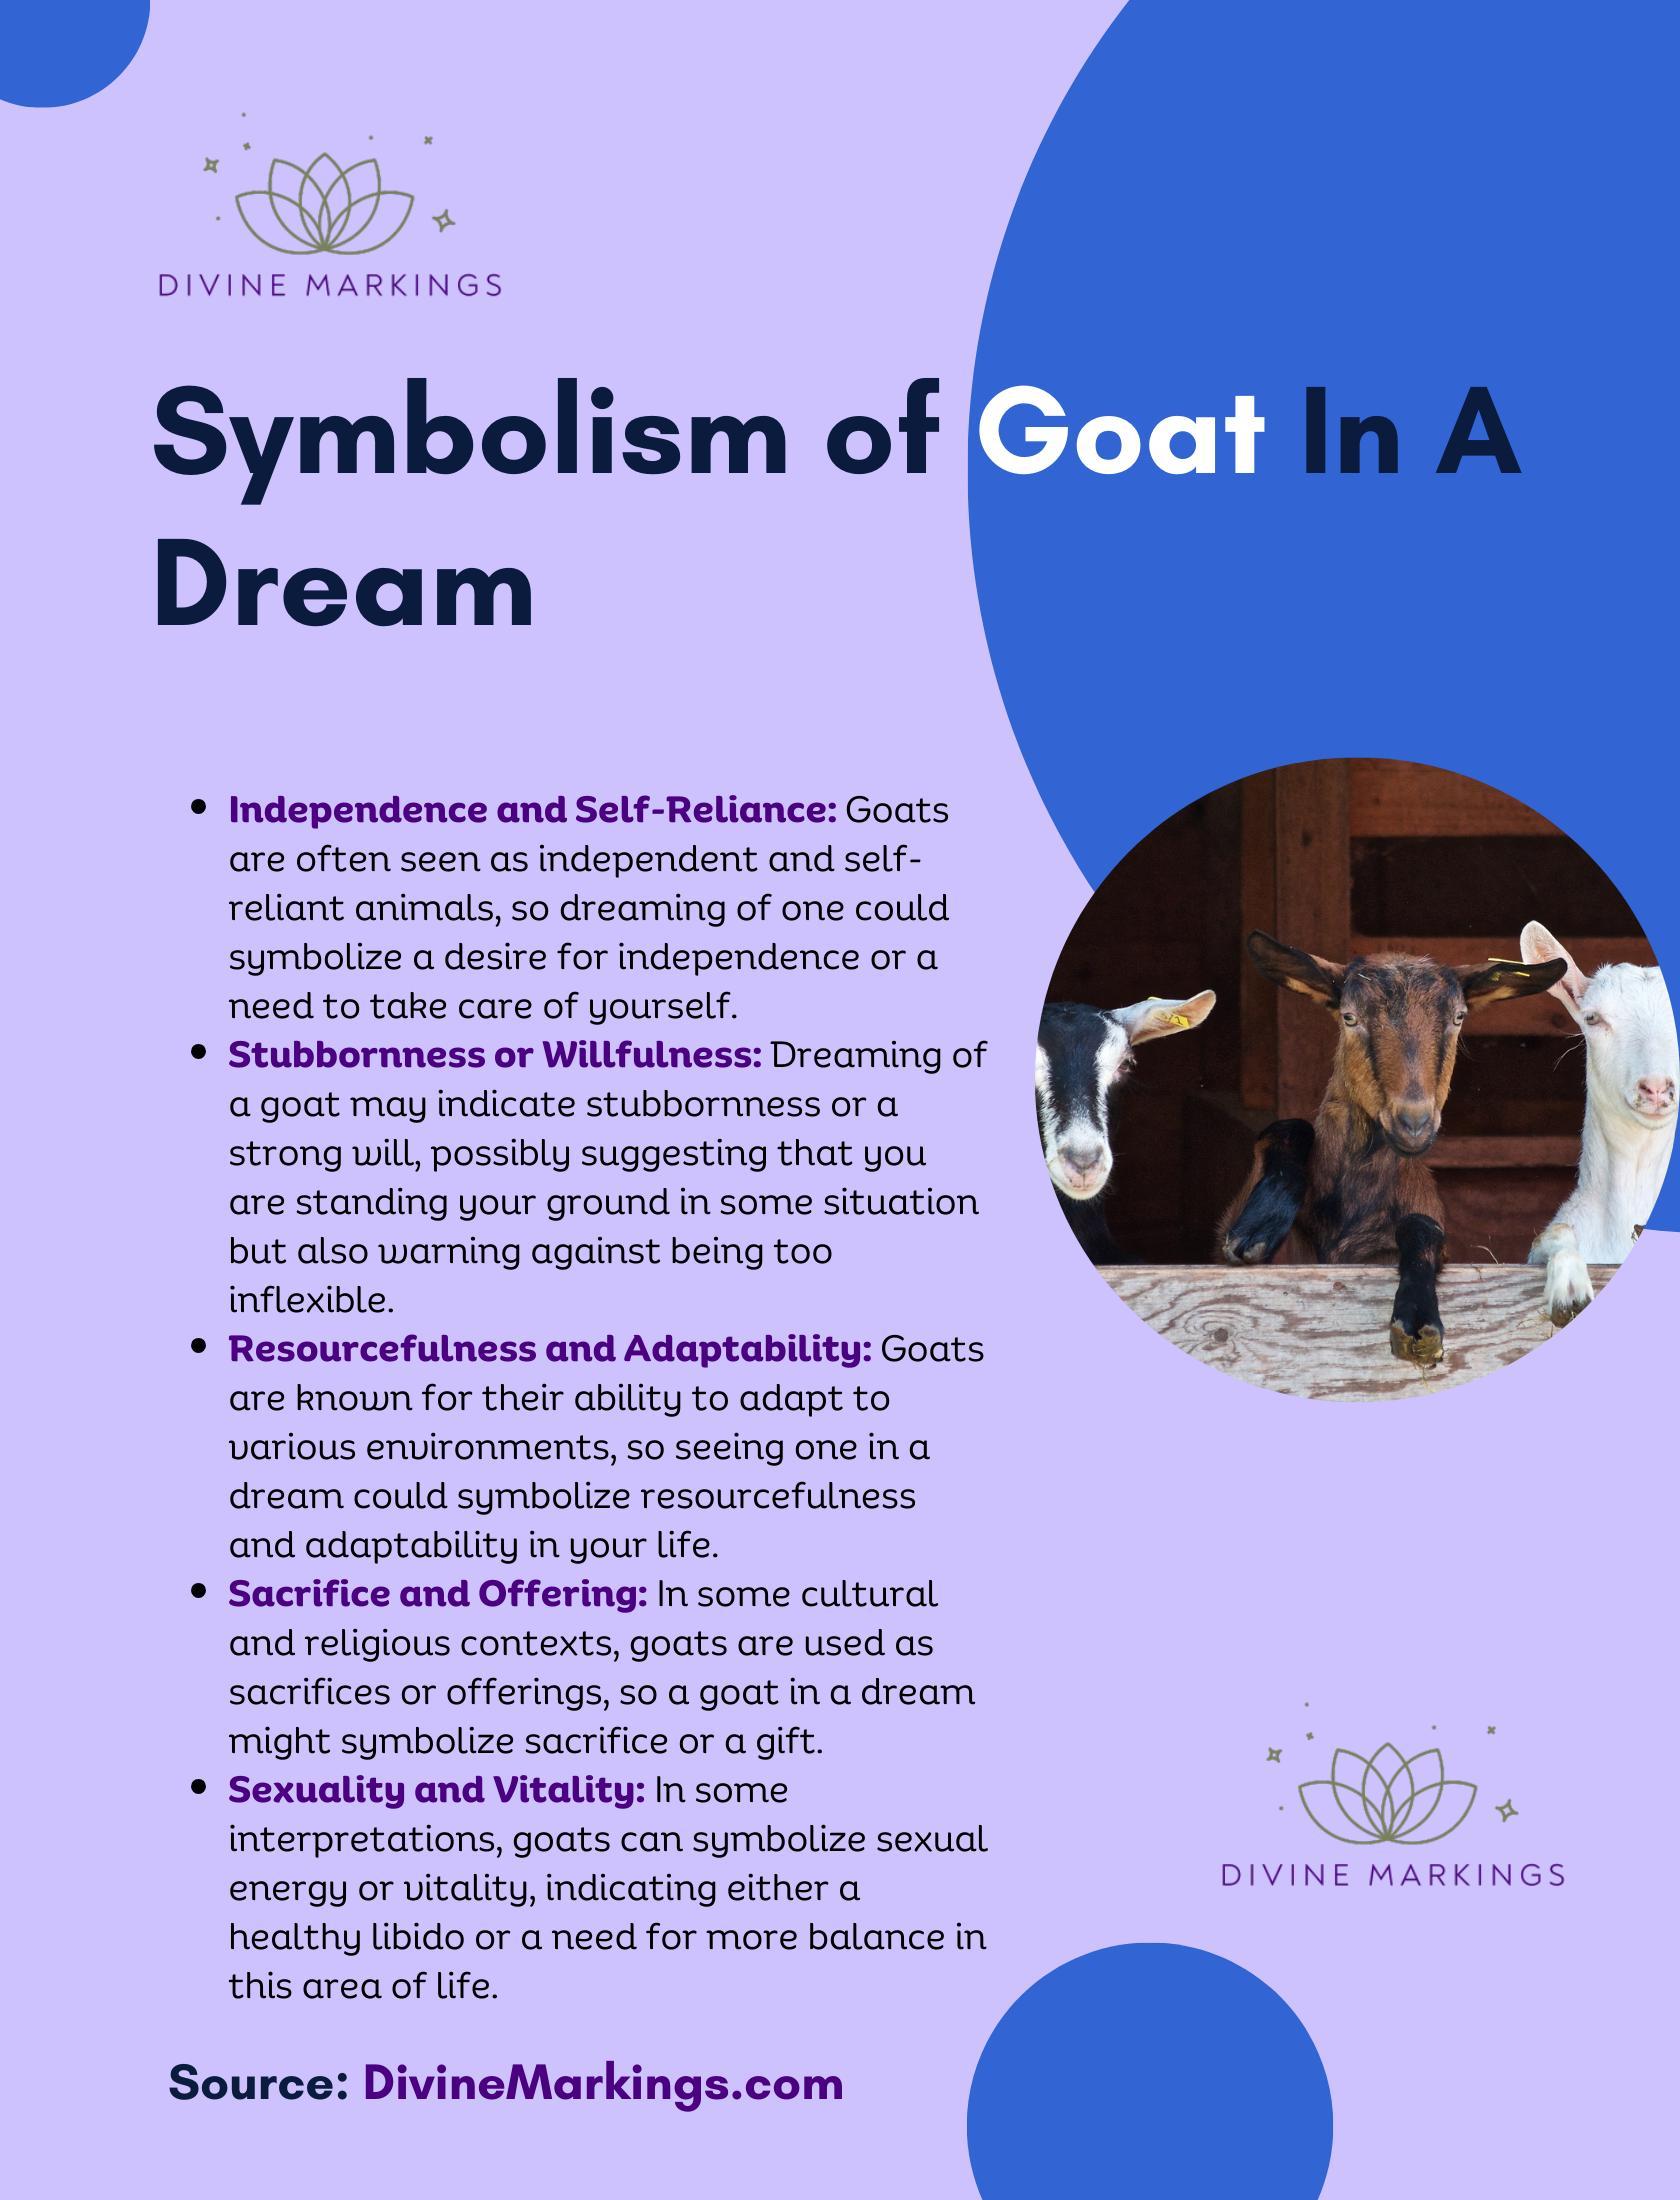 Symbolism of Goat In A Dream Infographic